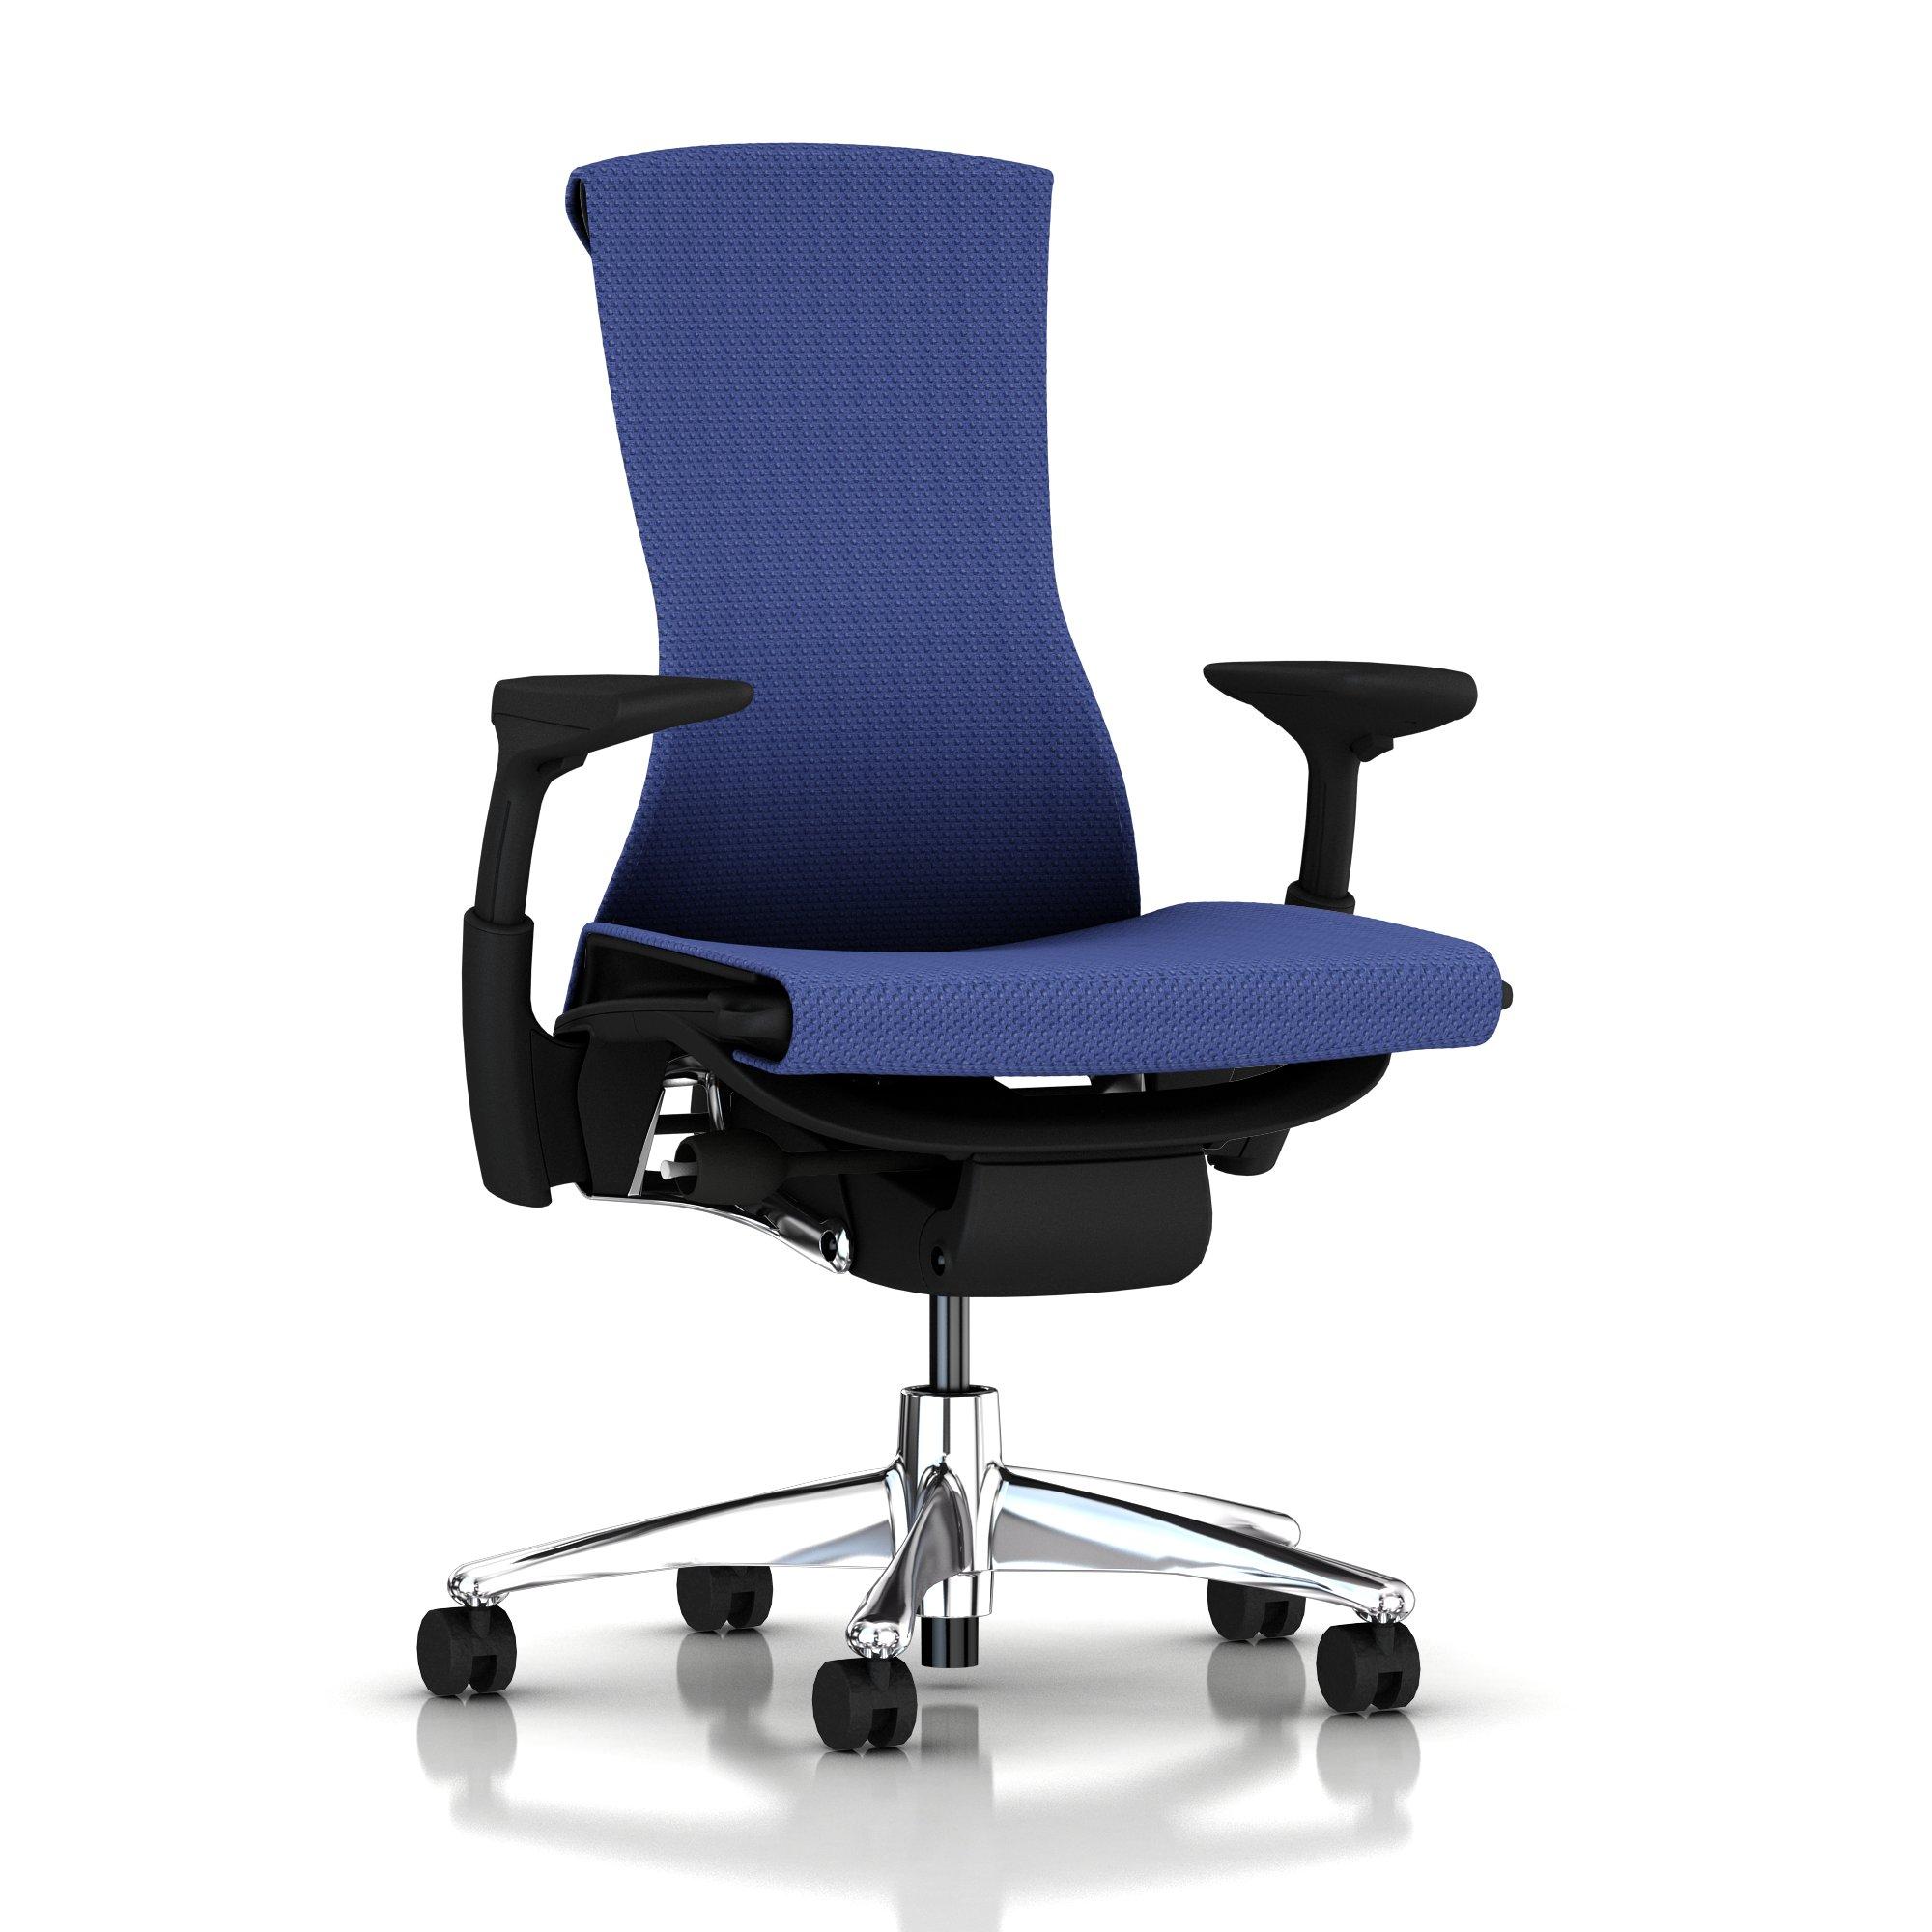 Embody Chair Iris Blue Balance with Graphite Frame Aluminum Base by Herman Miller